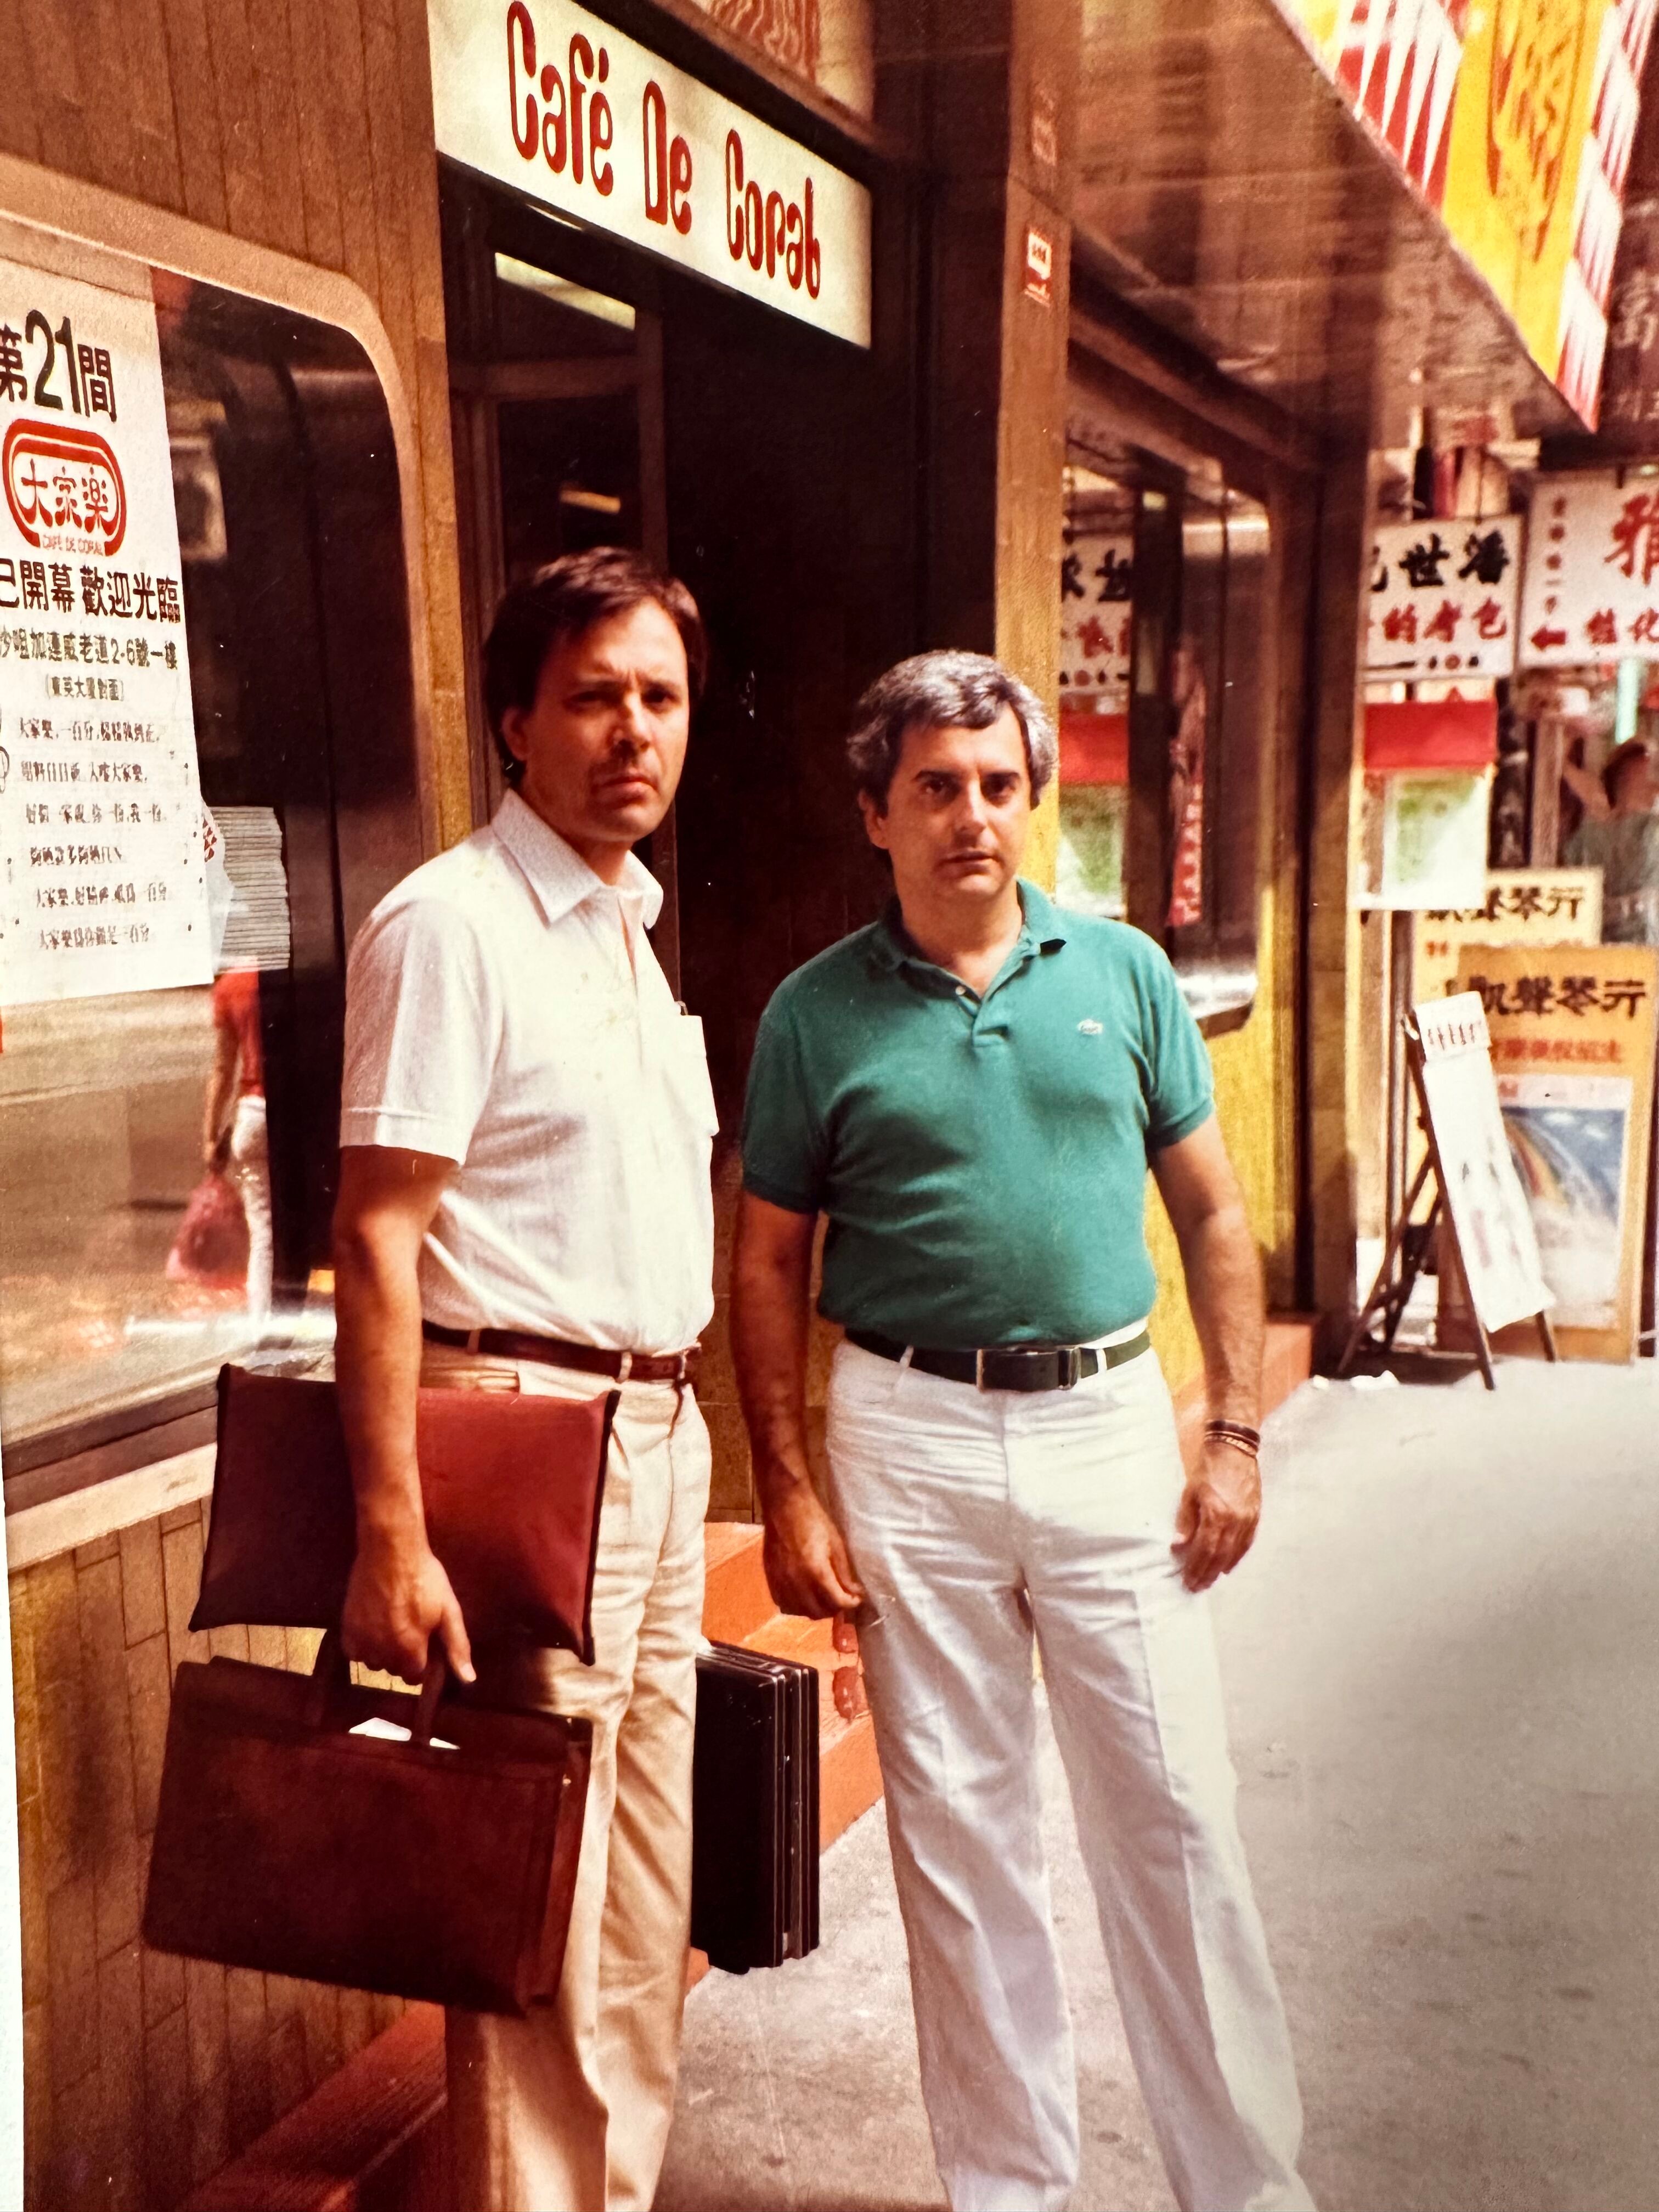 Allan (on right) with Wolfgang Puth in Hong Kong on Bleyle trip ca 80's